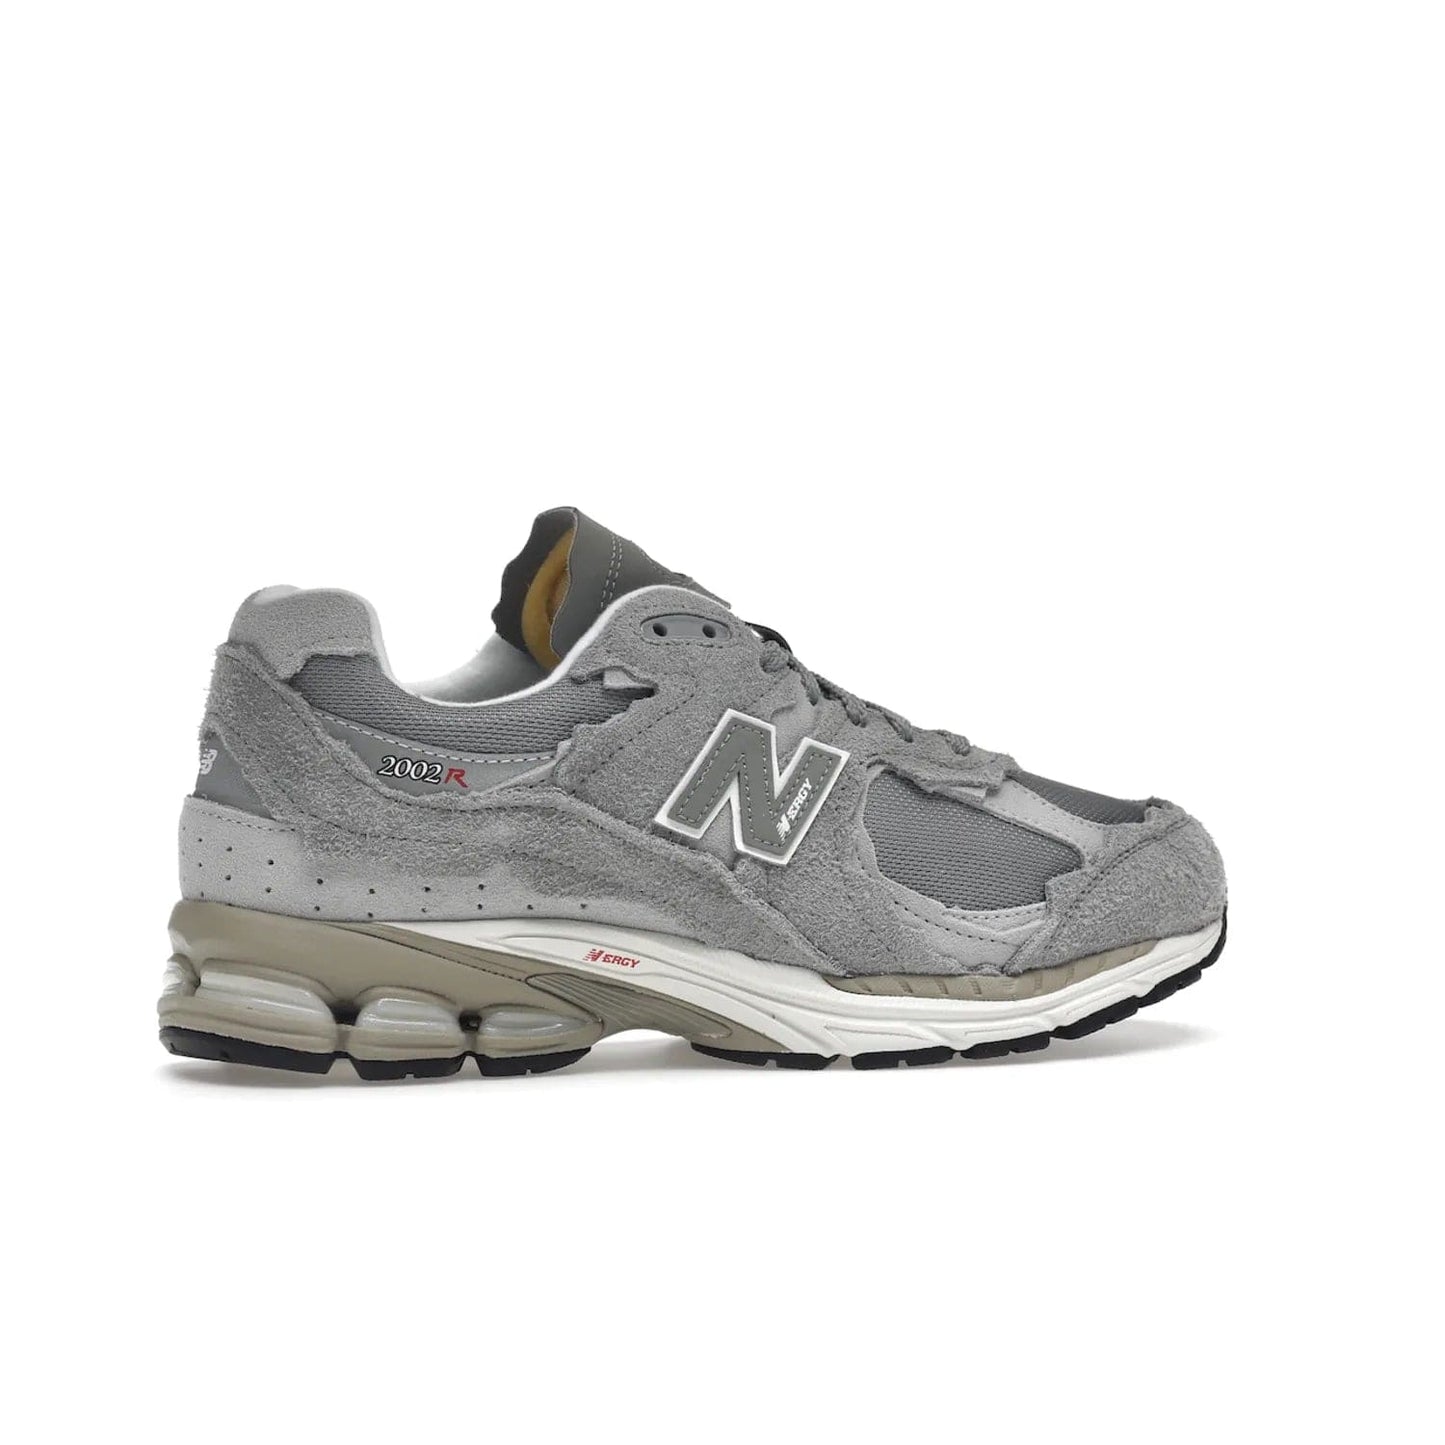 New Balance 2002R Protection Pack Grey - Image 35 - Only at www.BallersClubKickz.com - The New Balance 2002R Protection Pack Grey provides superior protection and all-day comfort. It features a blend of synthetic and mesh materials, foam midsole, rubber outsole, and a toe cap and heel counter. Show off the classic "N" logo and "2002R" lettering. Get a pair on February 14, 2023 for protection and style.